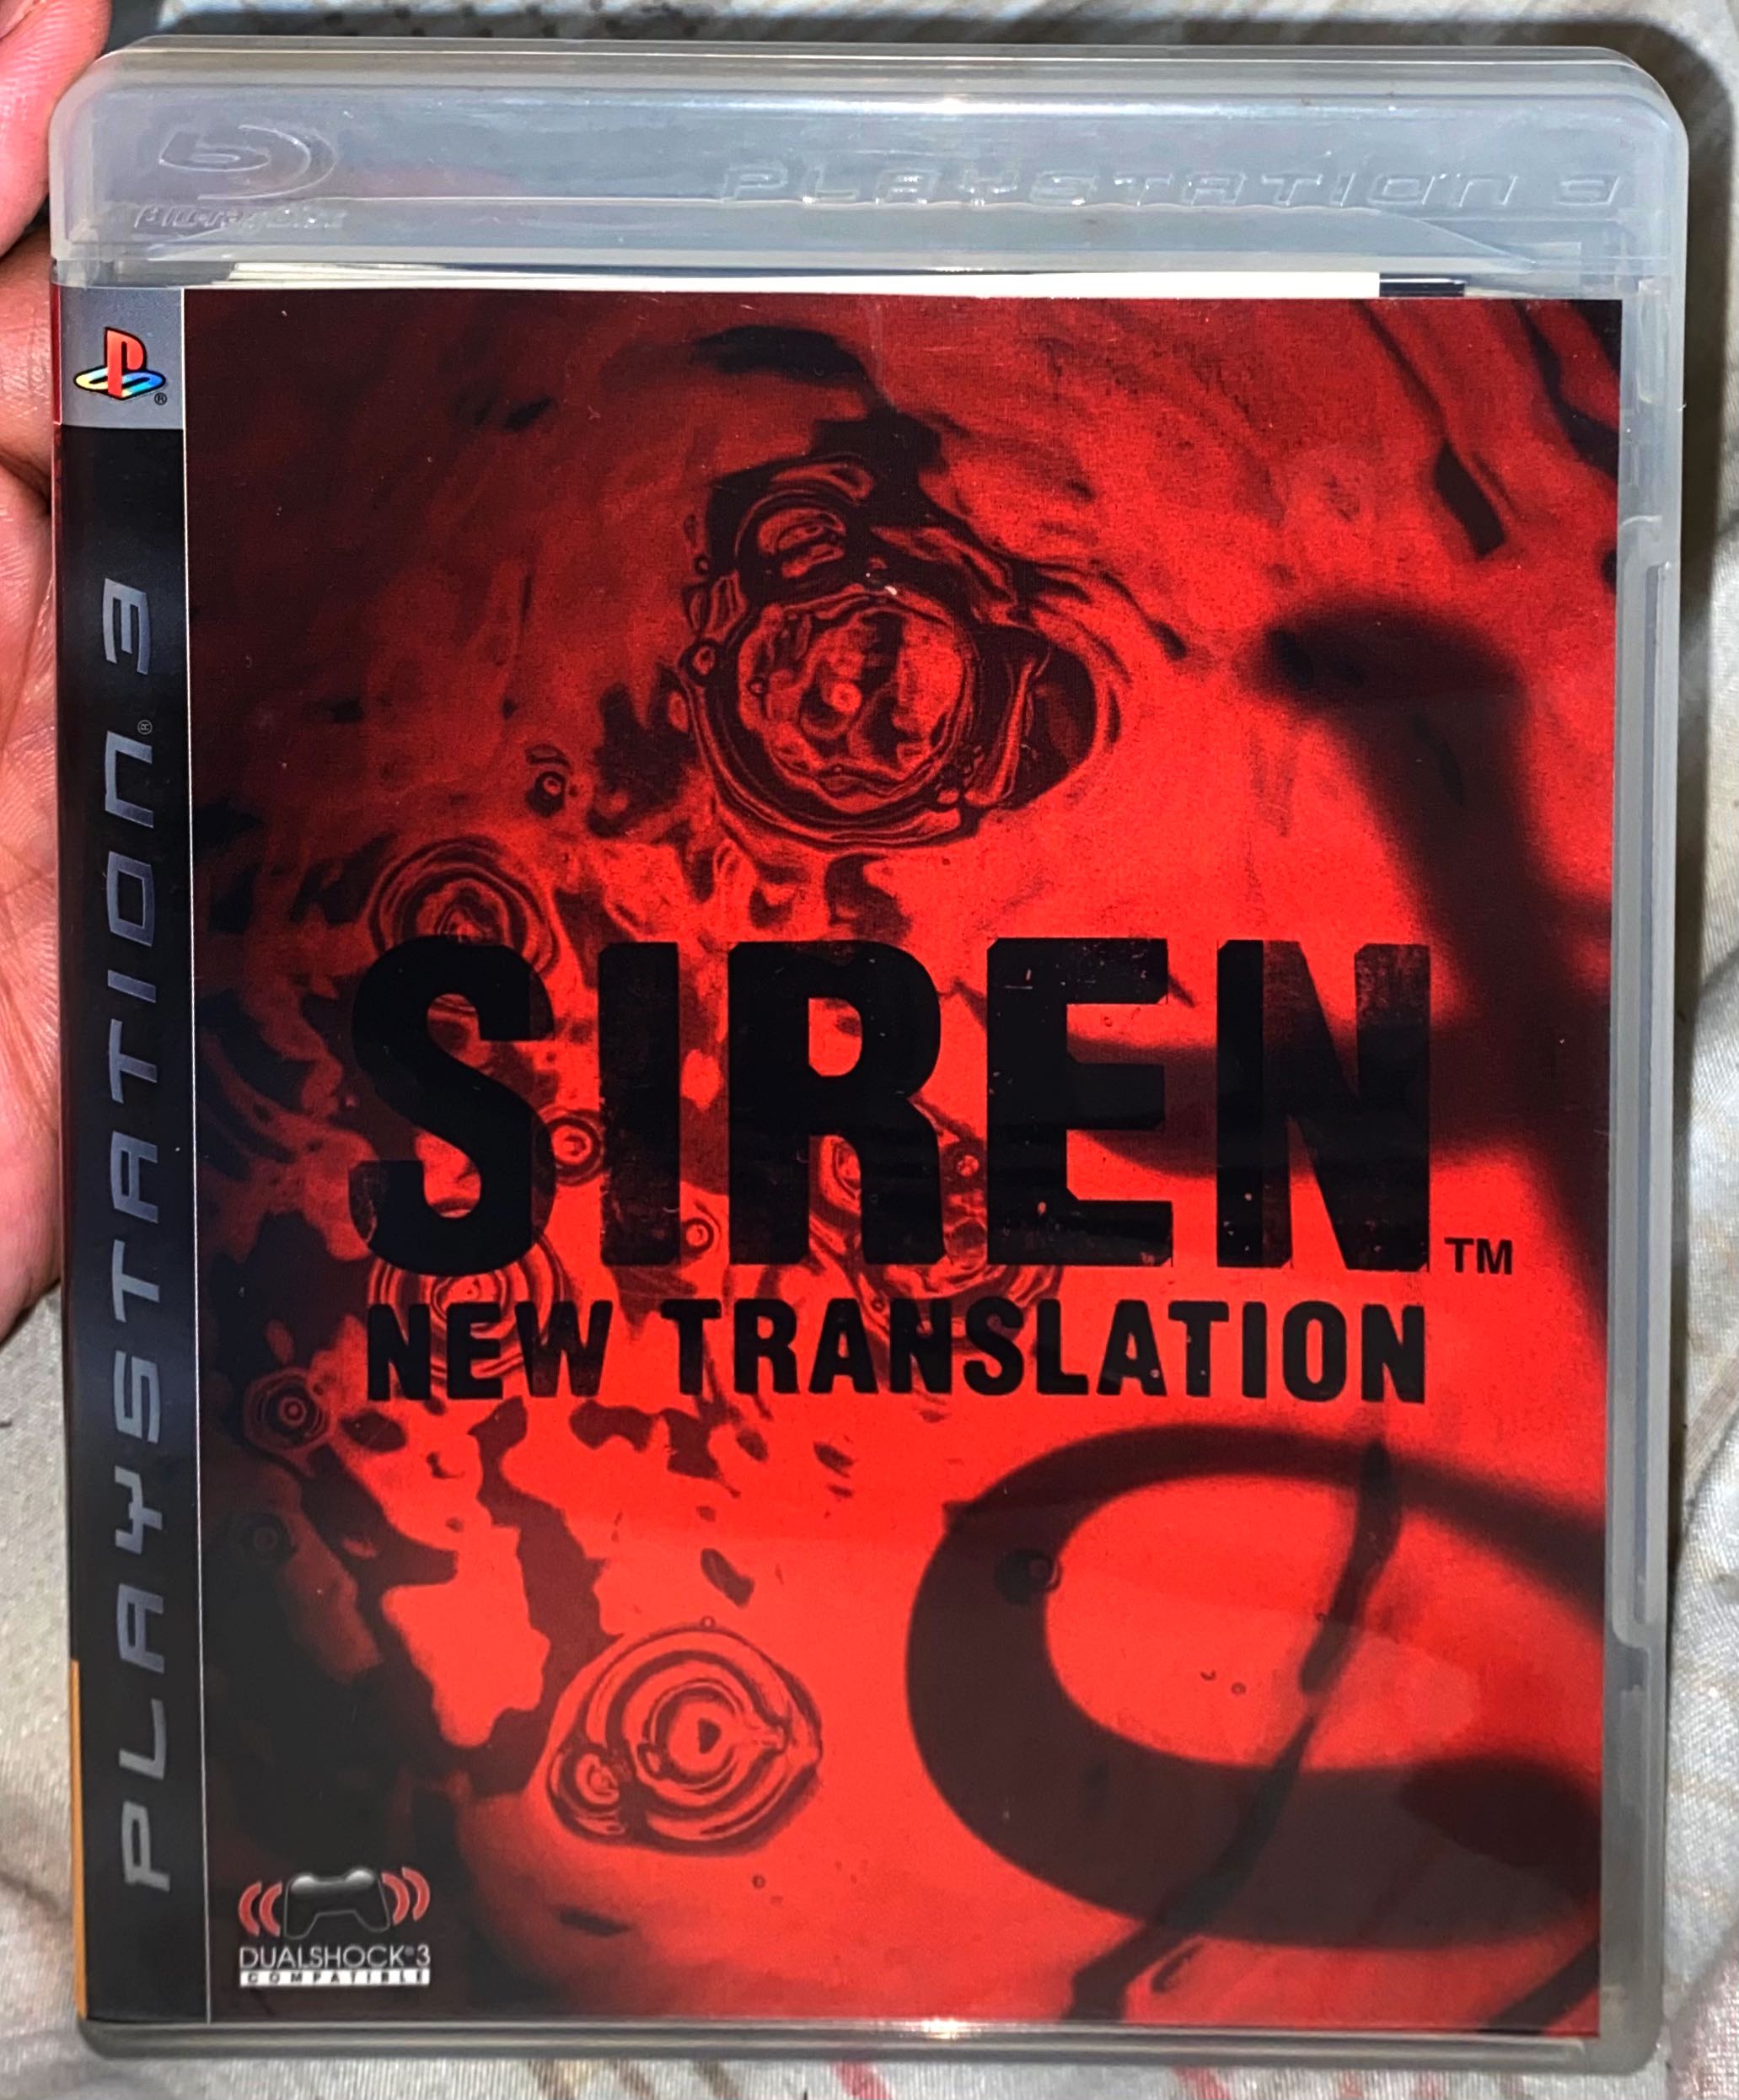 PS3 SIREN: New Translation PLAYSTATION 3 the Best 